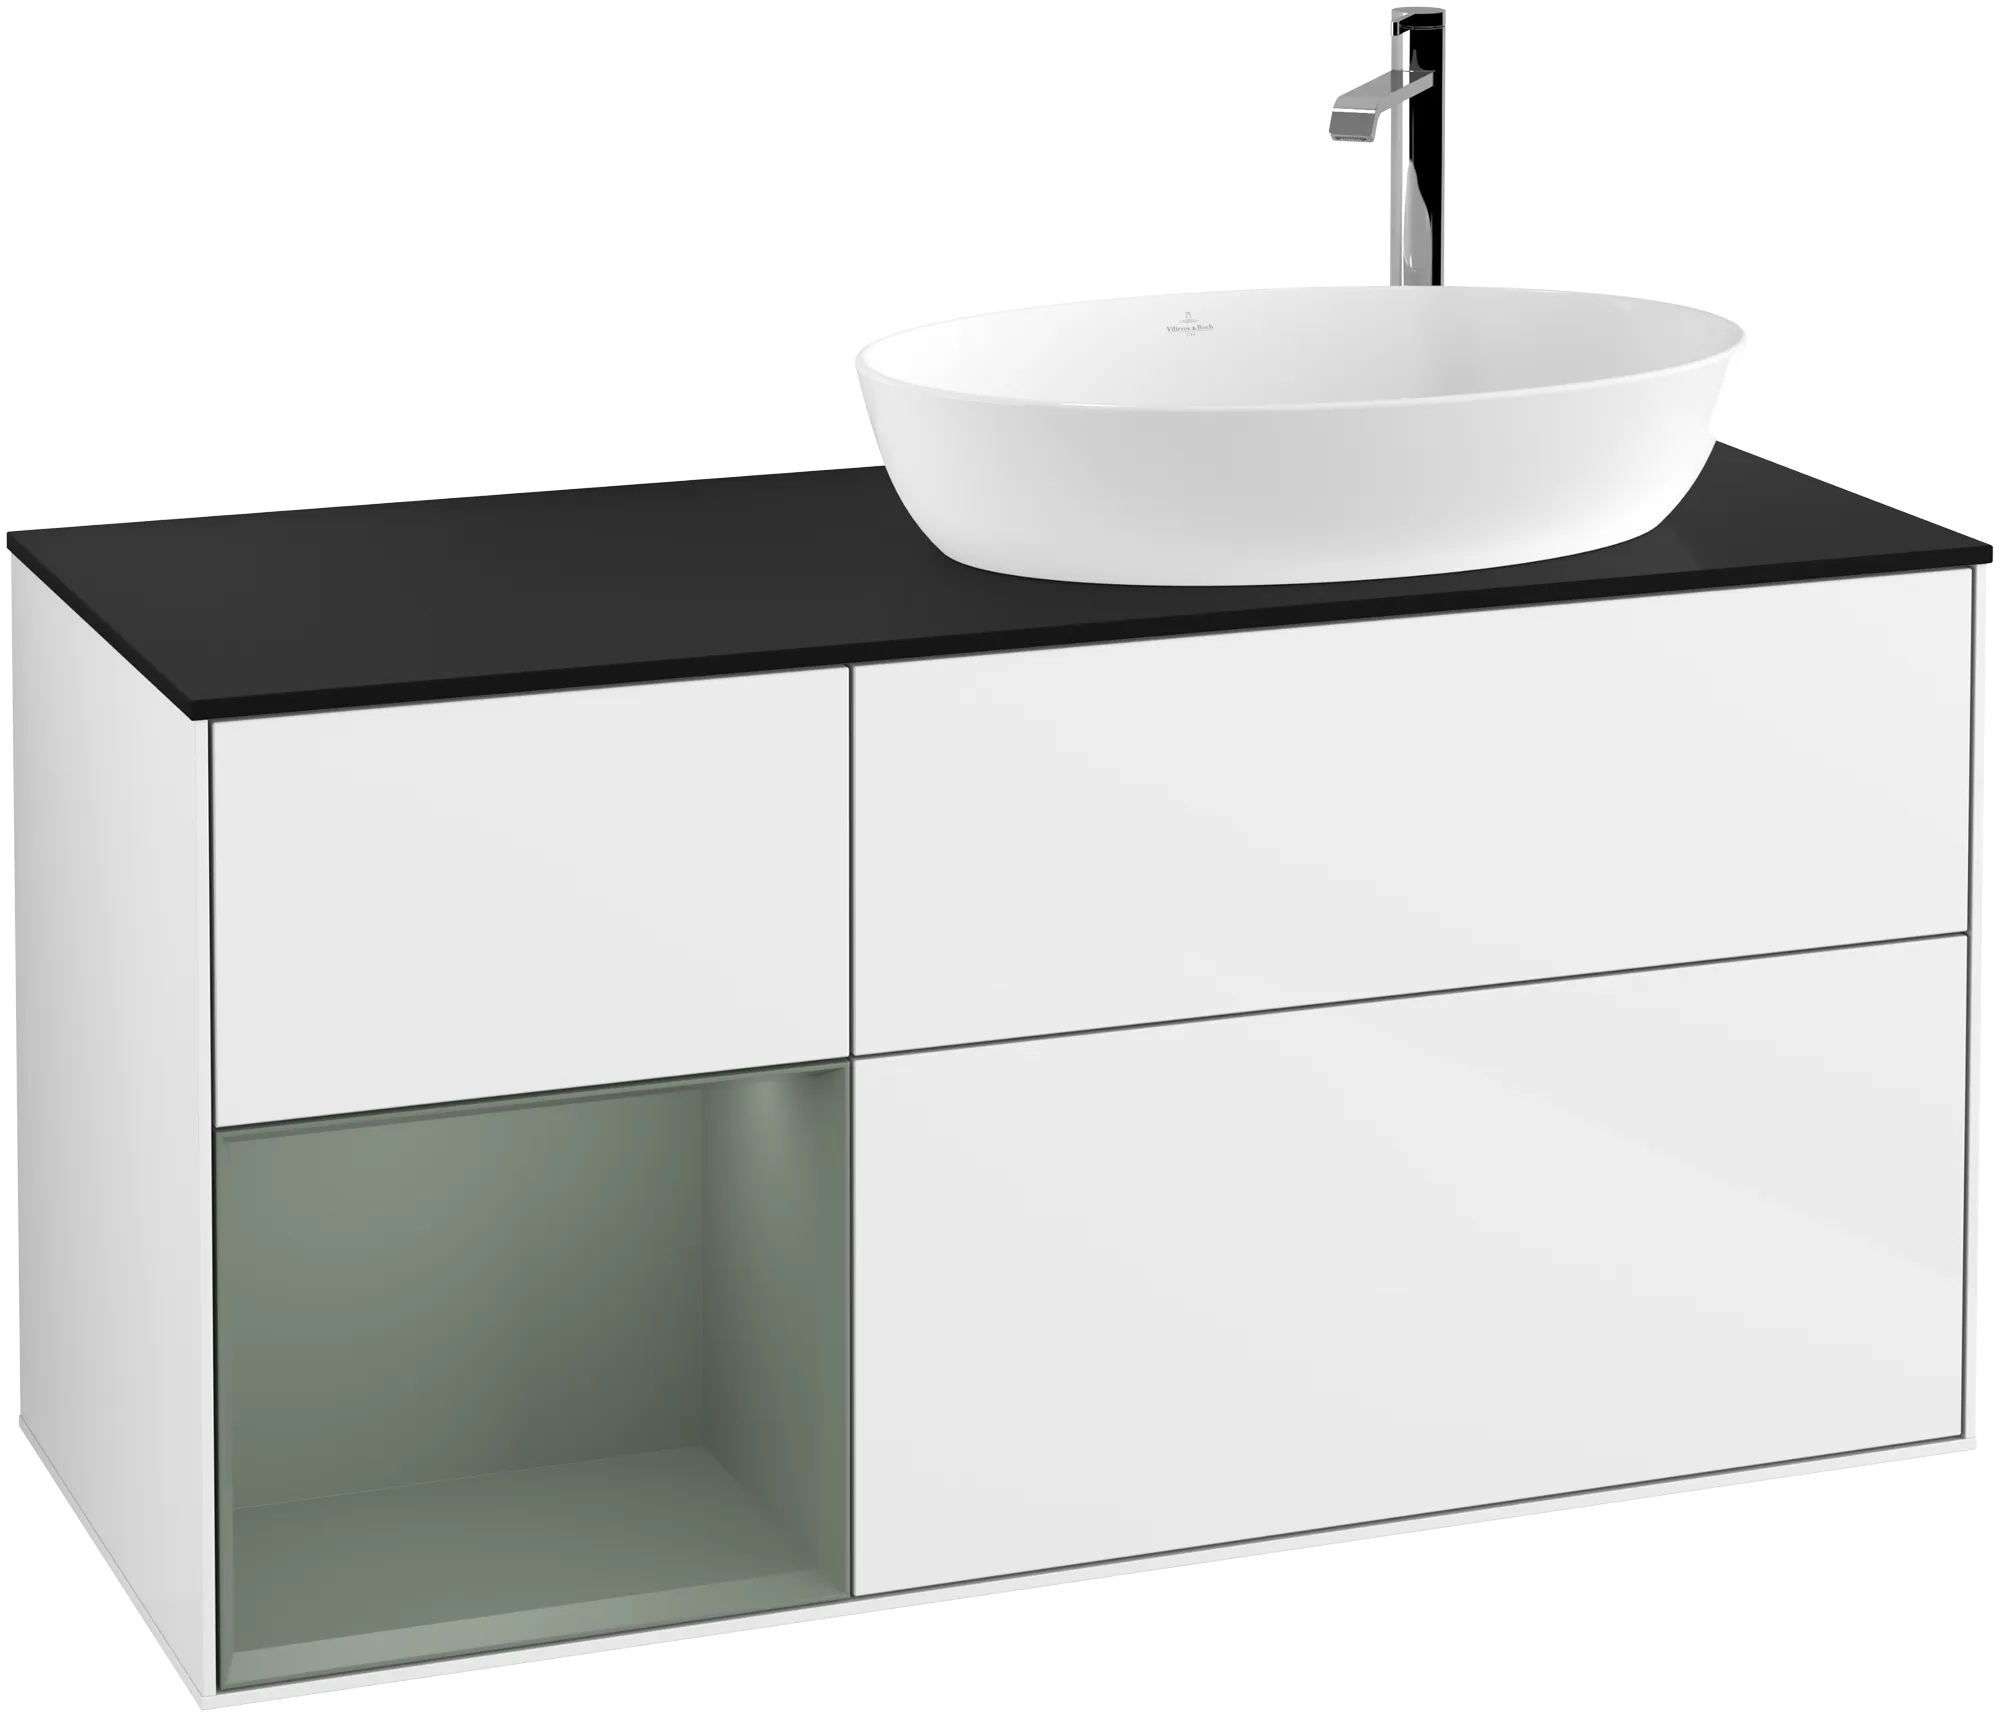 Зображення з  VILLEROY BOCH Finion Vanity unit, with lighting, 3 pull-out compartments, 1200 x 603 x 501 mm, Glossy White Lacquer / Olive Matt Lacquer / Glass Black Matt #G922GMGF